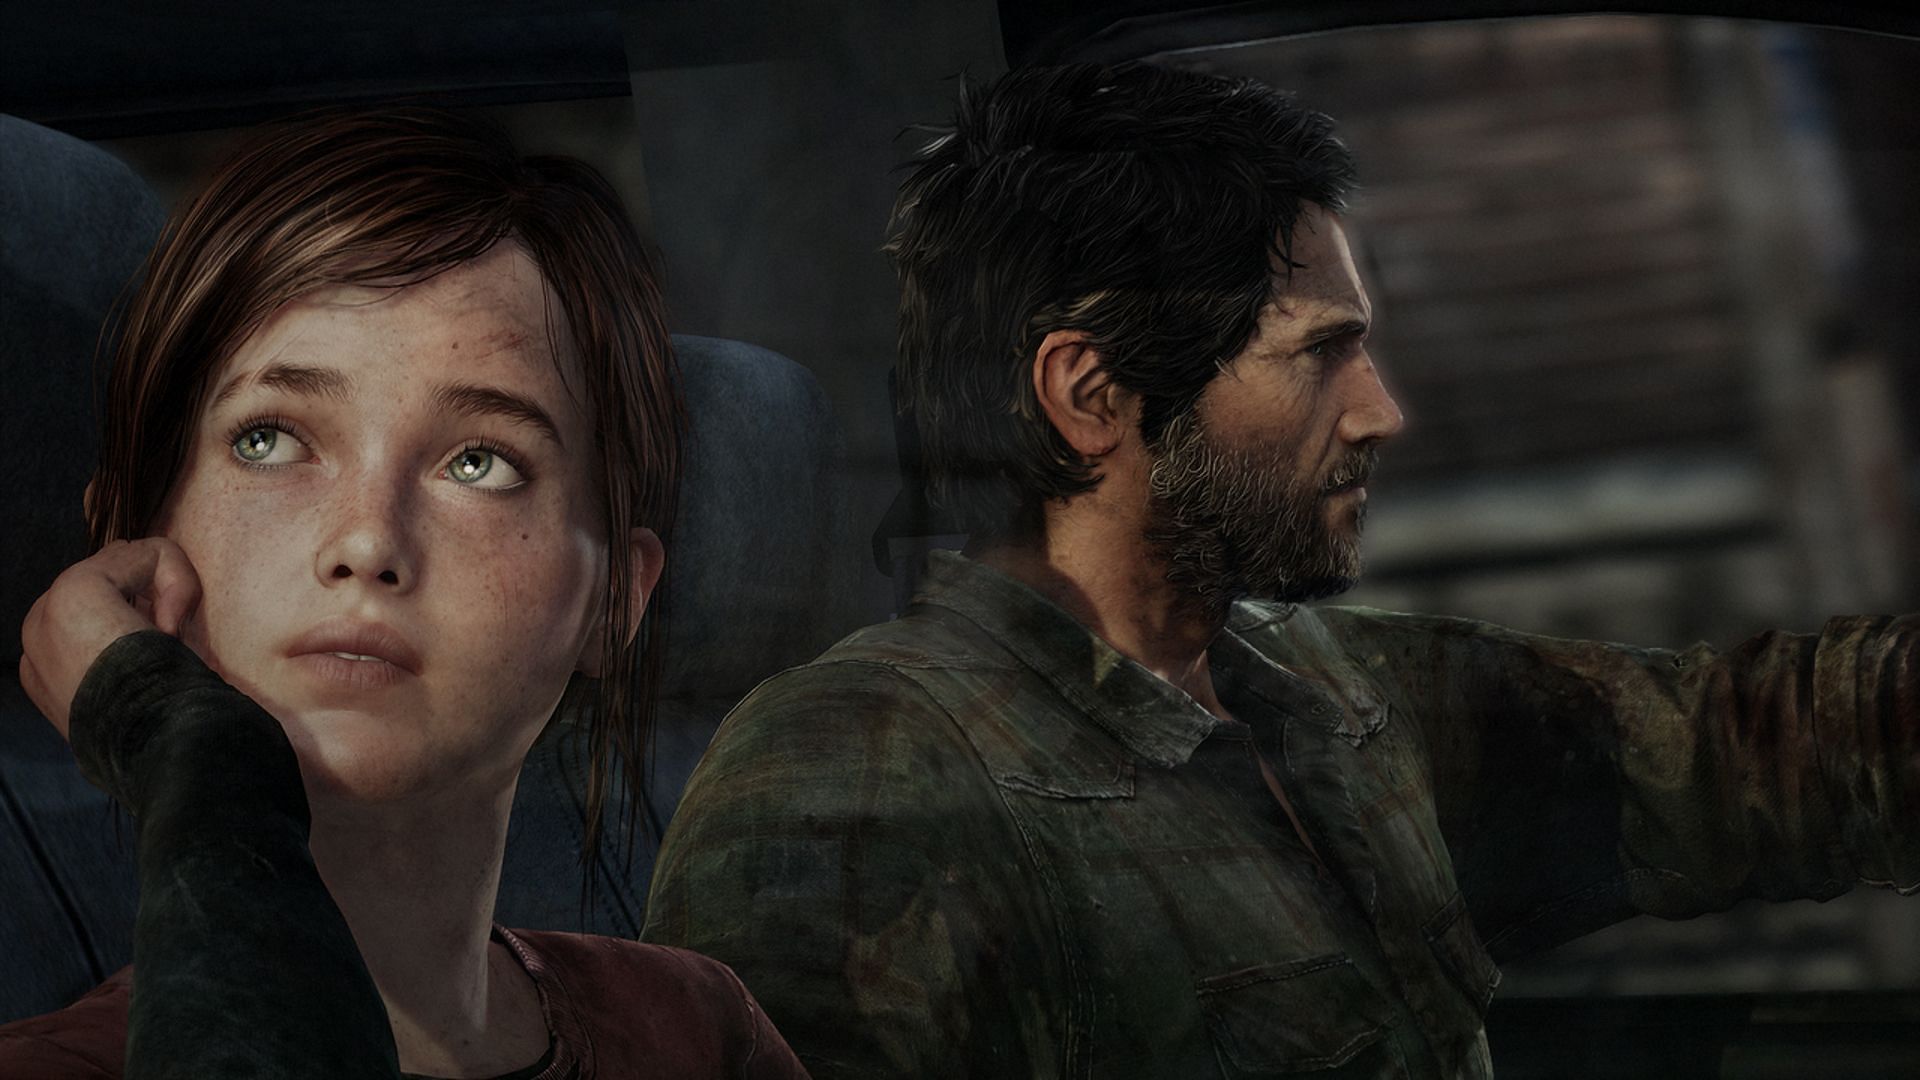 PS5 and PC users will be able to play The Last of Us Part 1 later this year (Image via PlayStation)